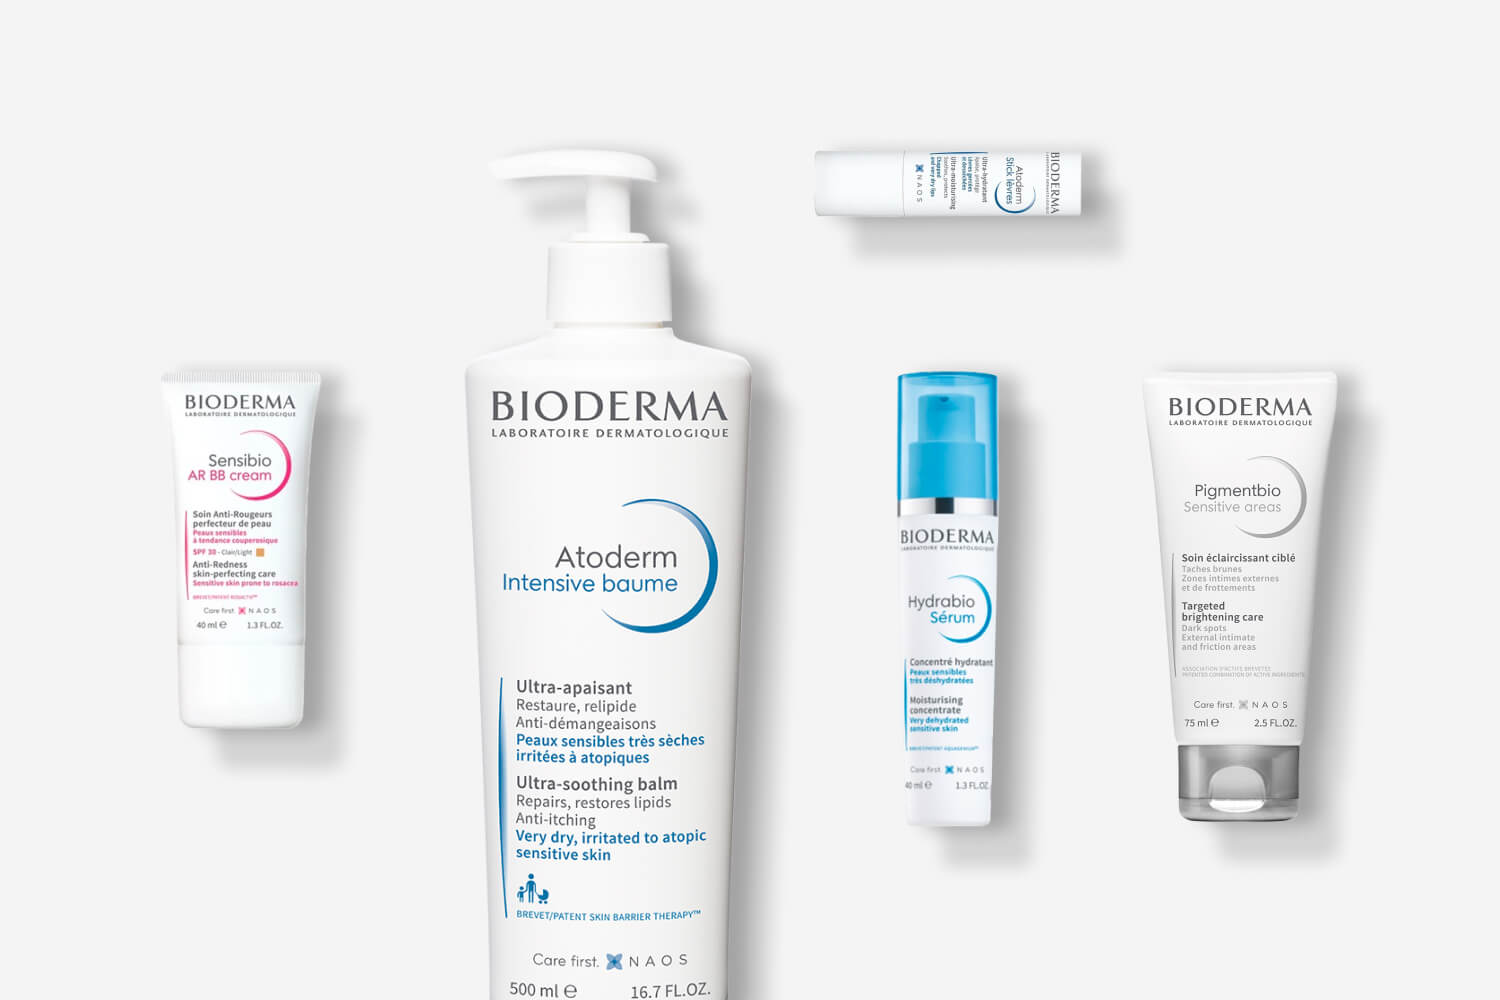 Our Top 10 Best Bioderma Products